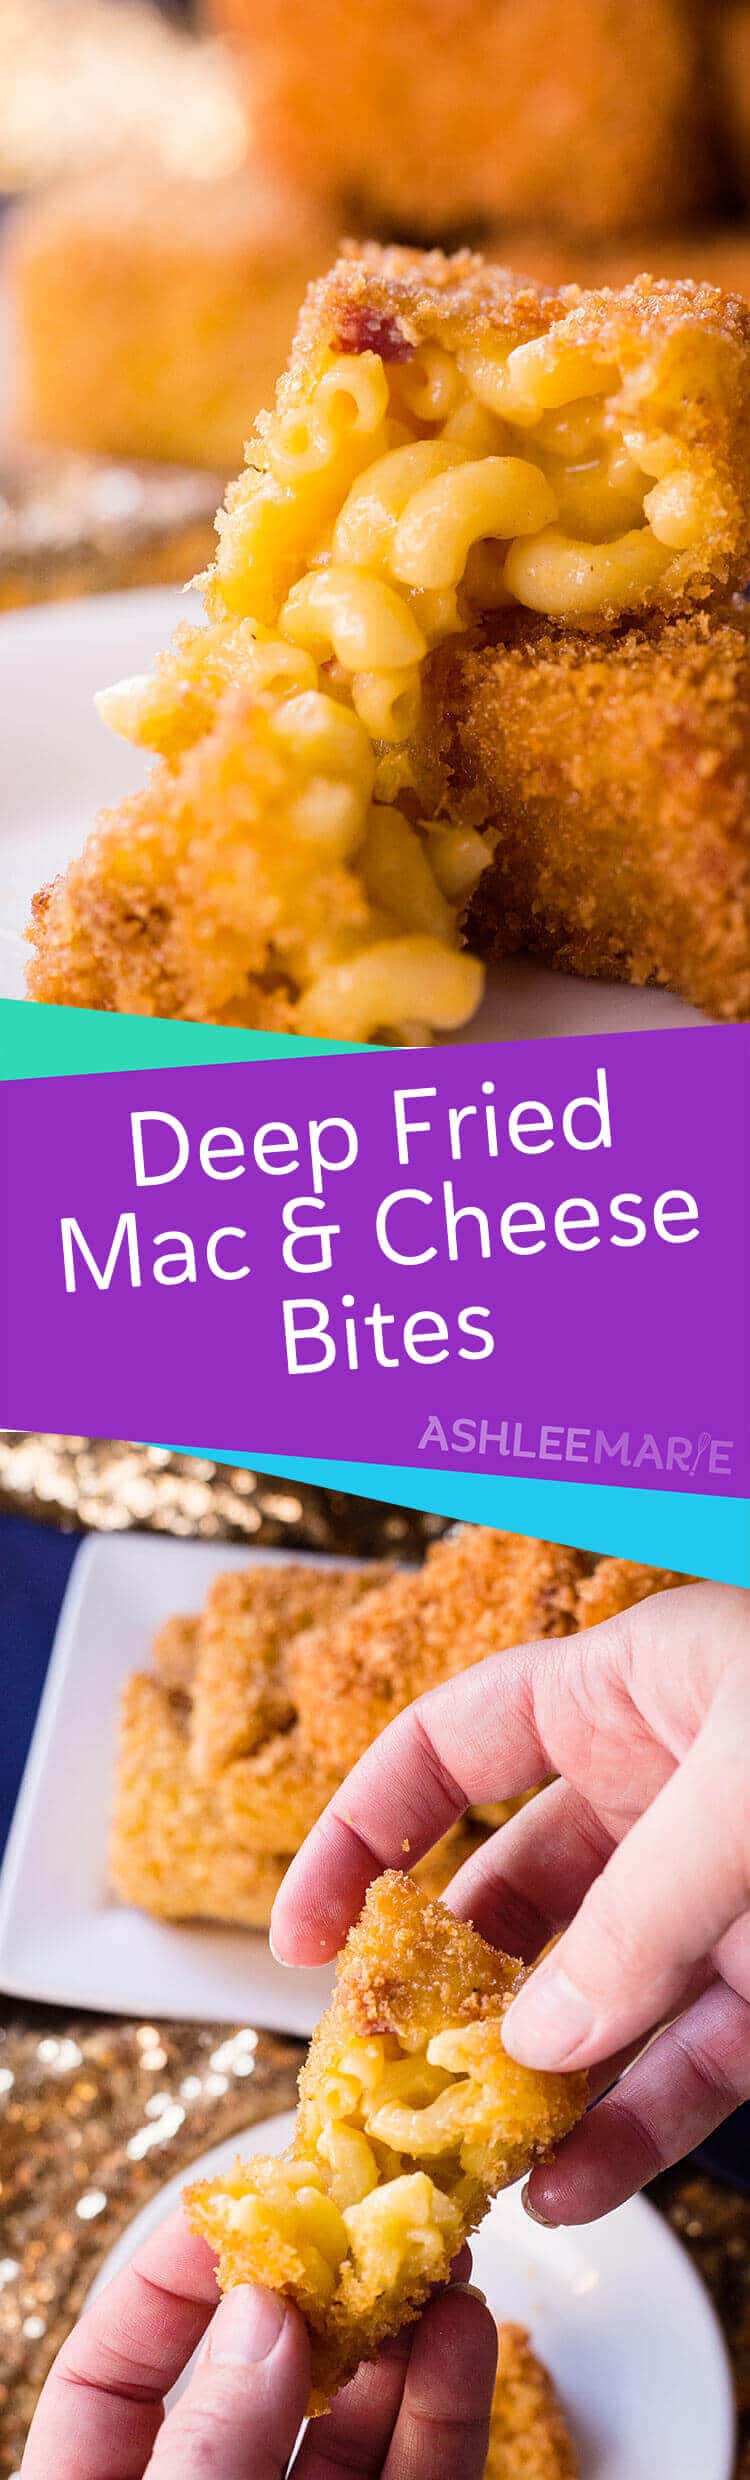 deep fried mac and cheese bites recipe and video